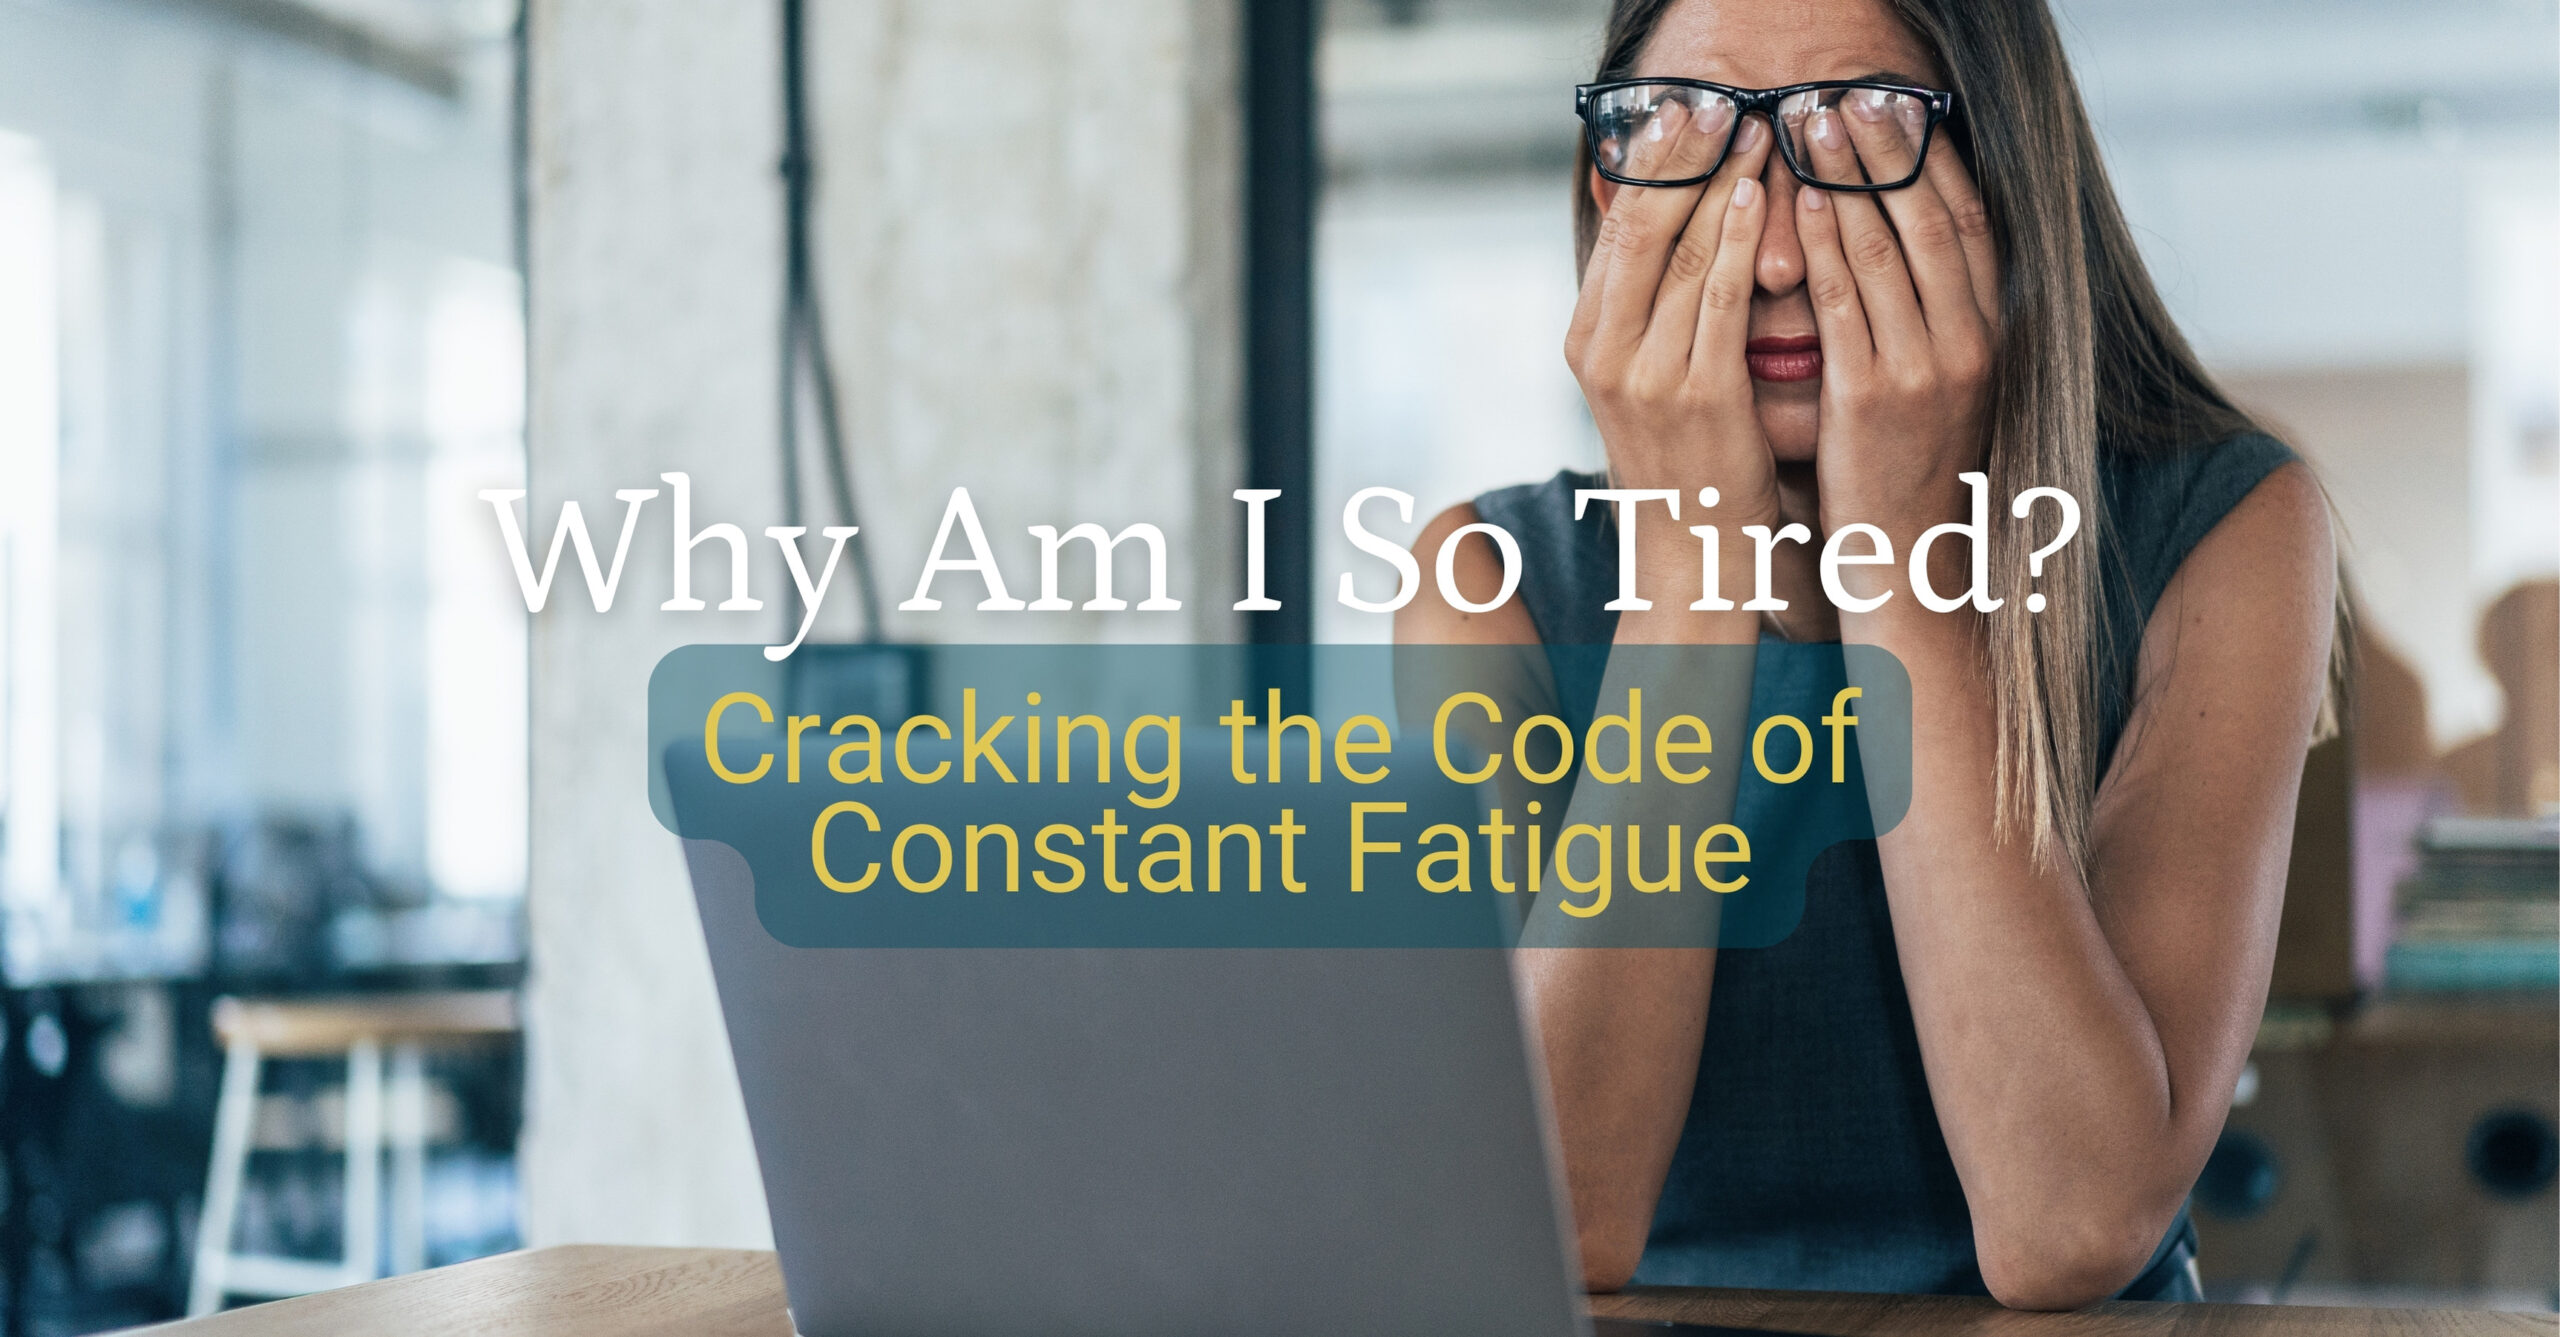 Why Am I So Tired? Cracking the Code of Constant Fatigue 2